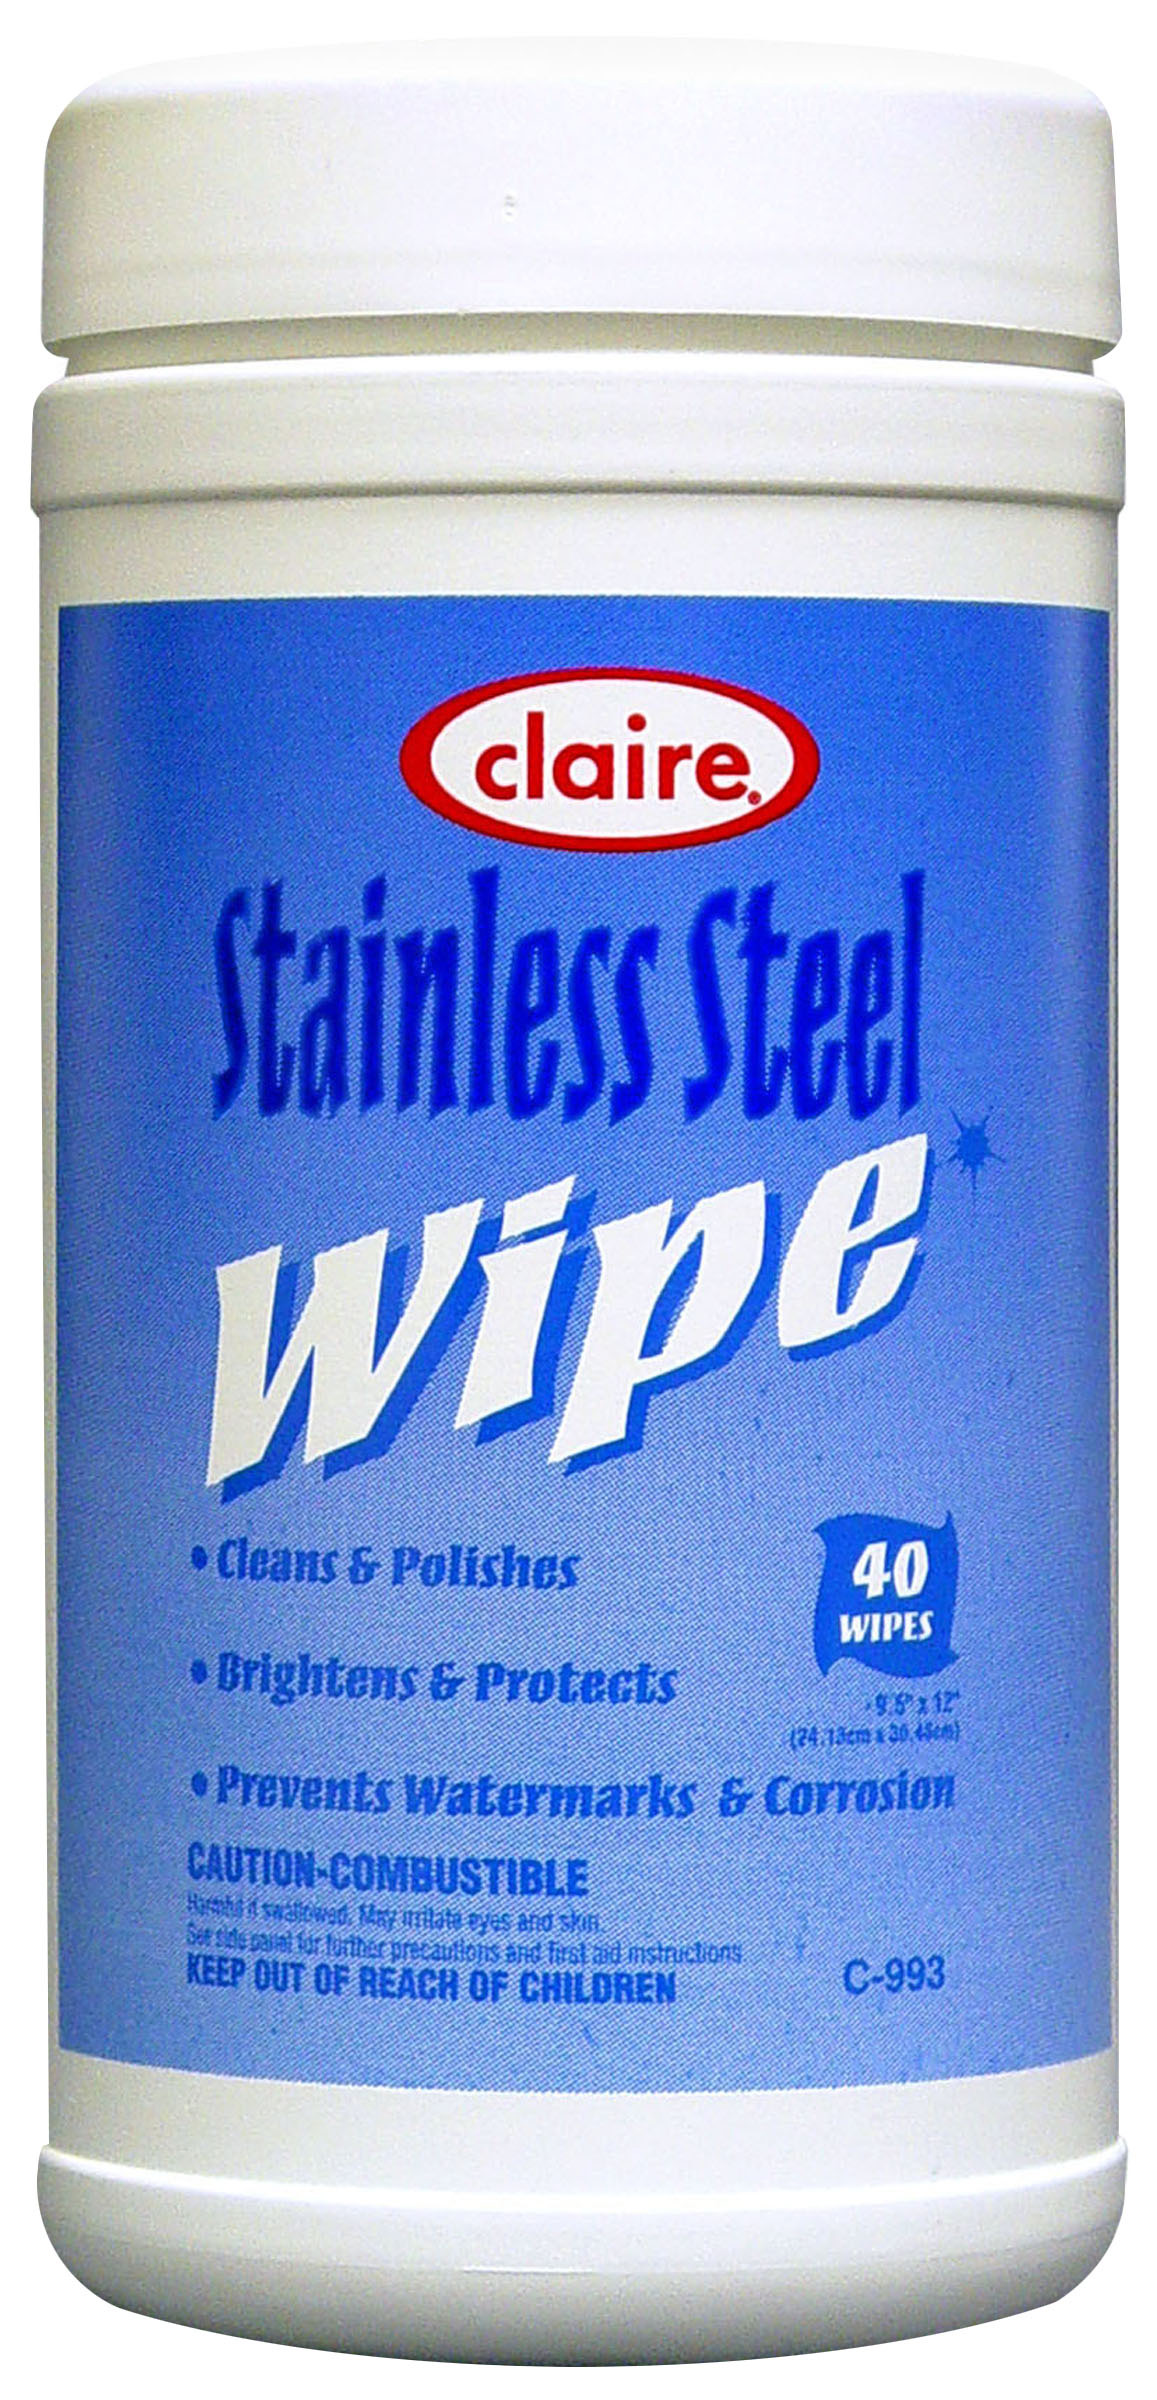 WIPES - STAINLESS STEEL CLEANER (6/40SHT)